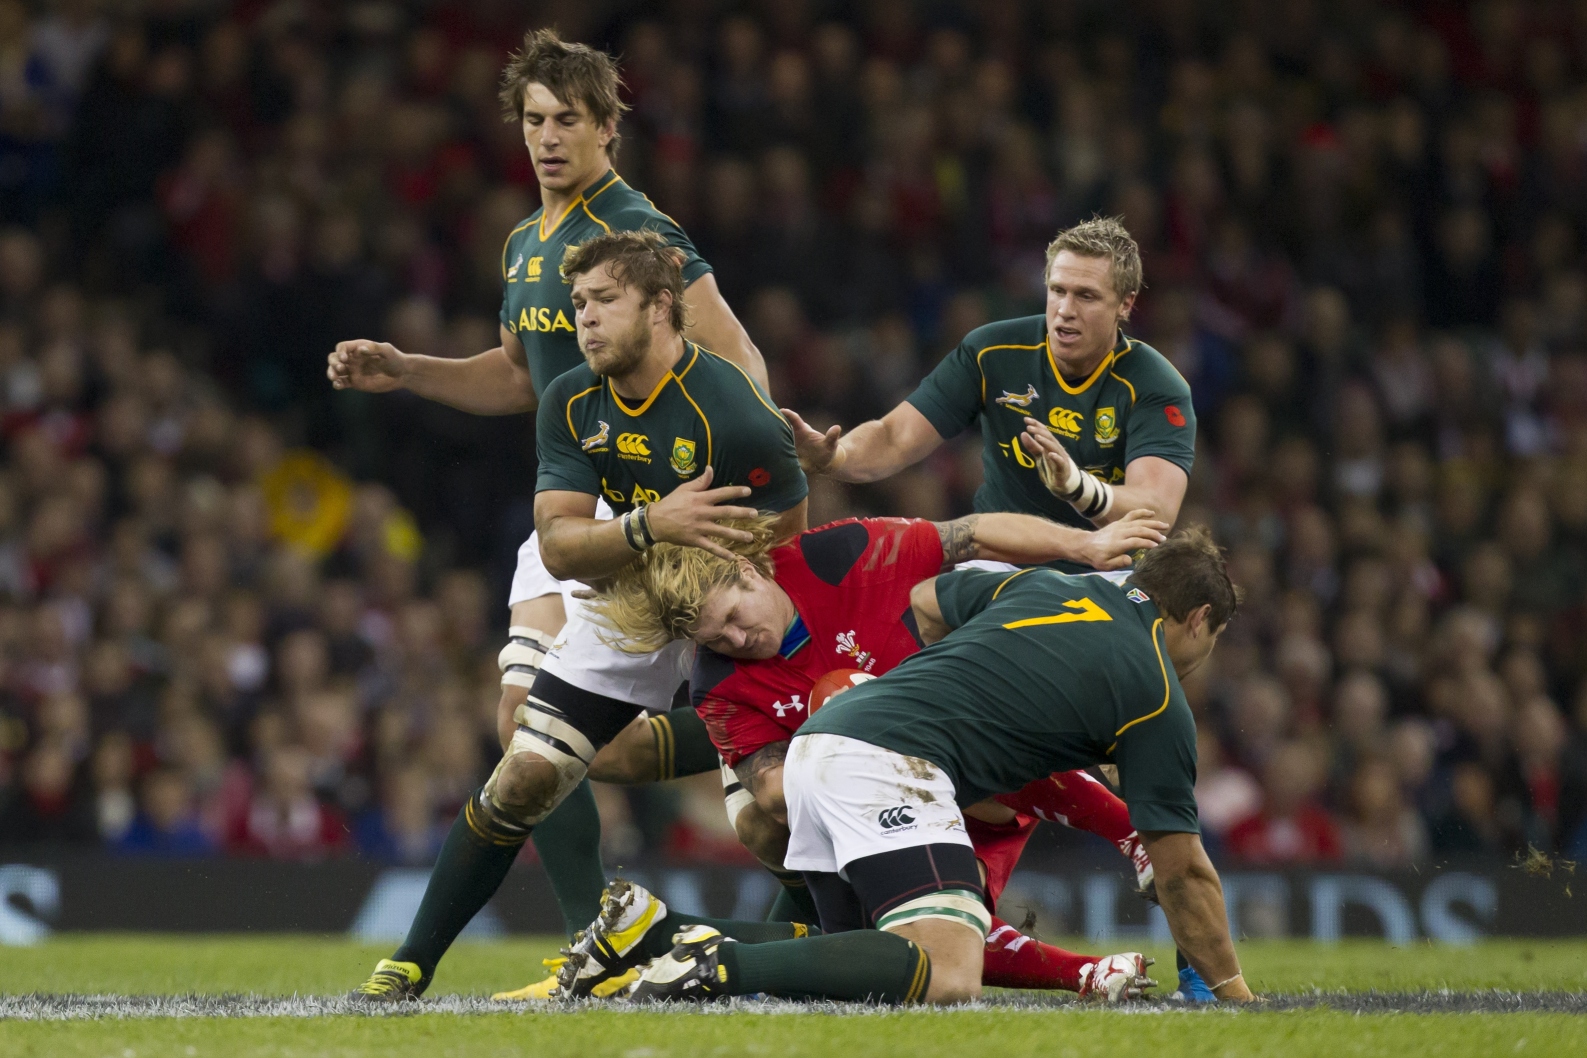 The Springboks playing Wales. Their next challenge will be against Scotland. Photo: AP